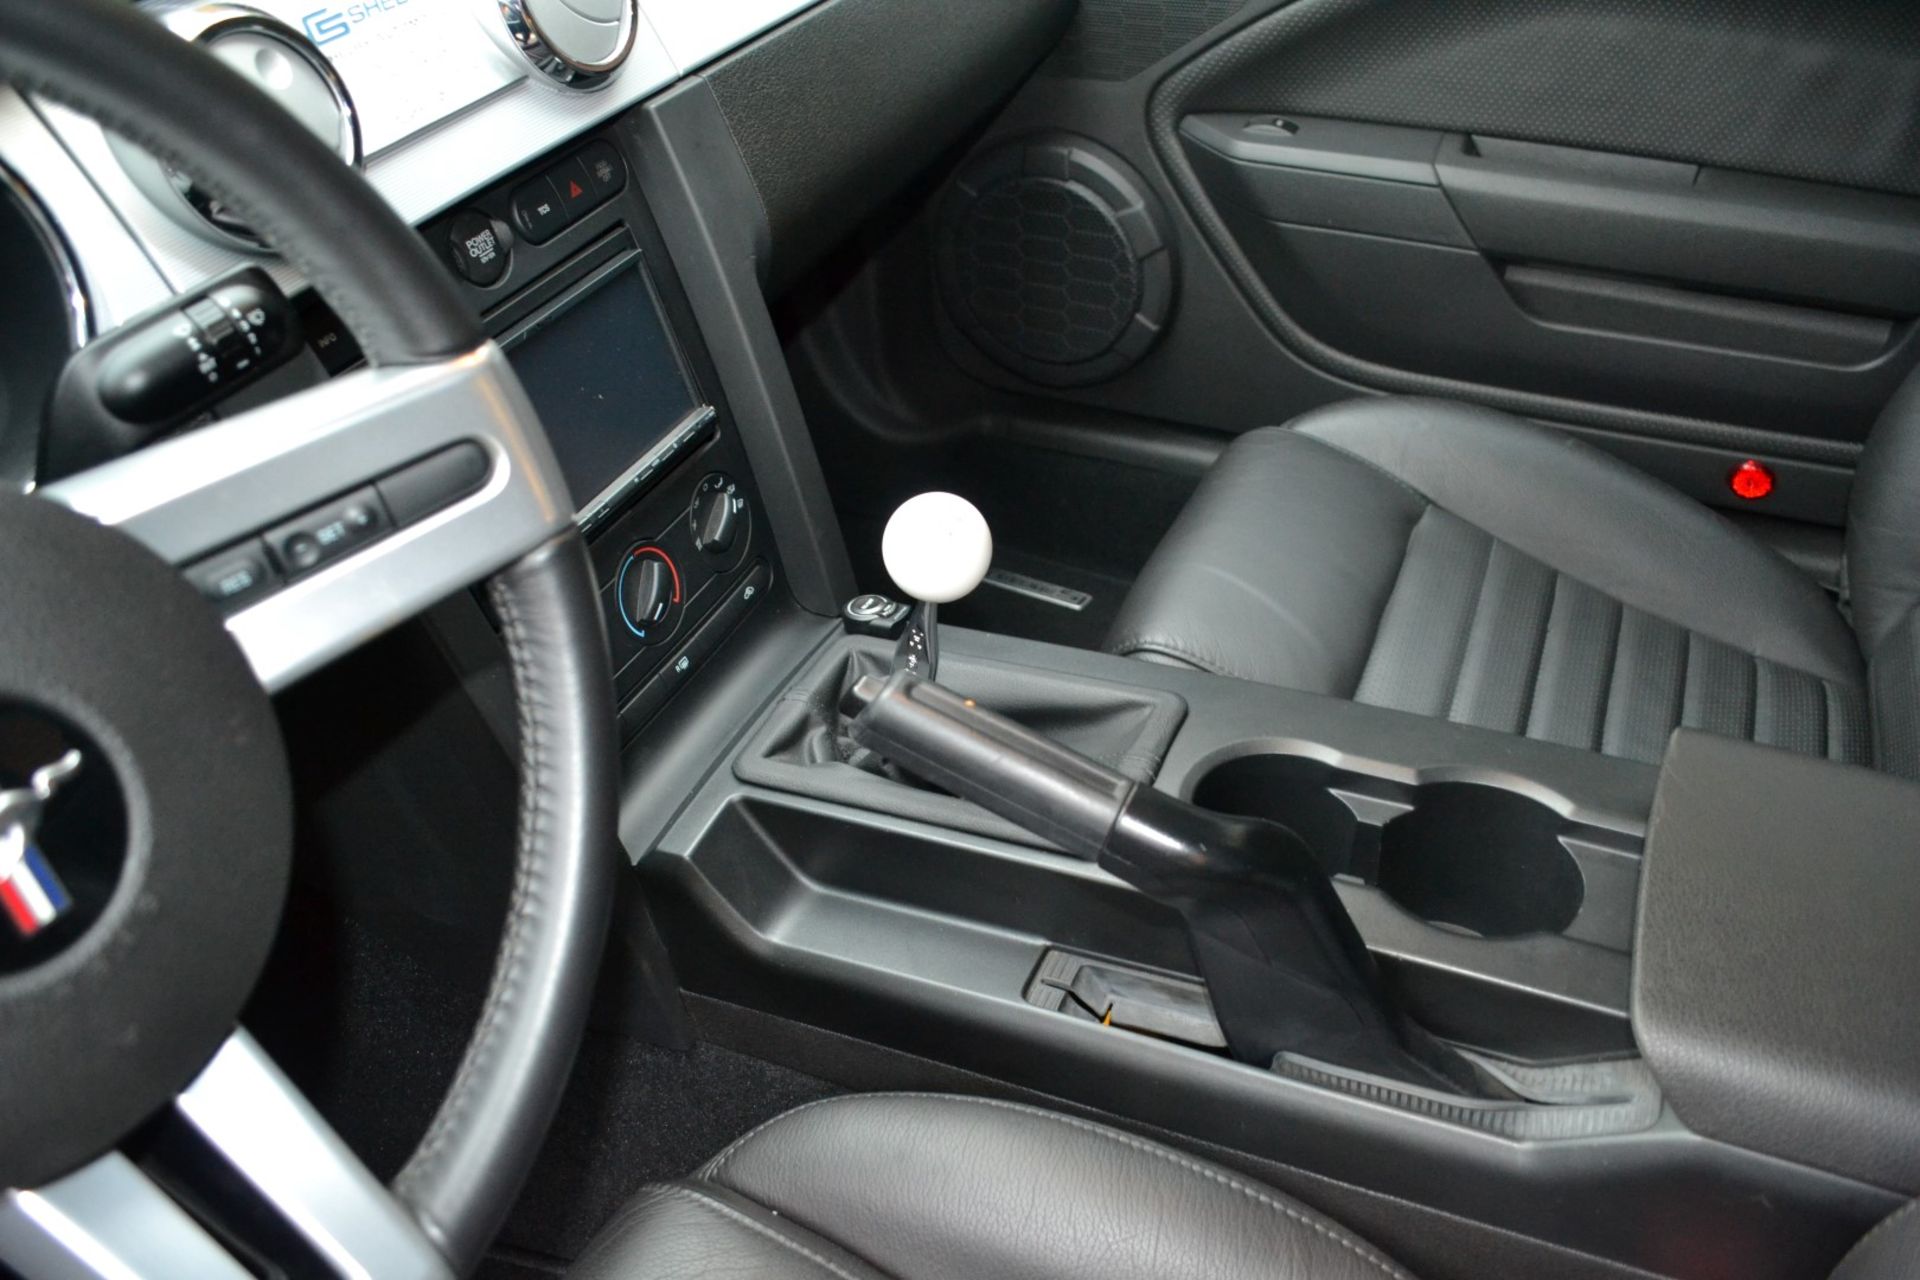 Limited Edition Supercharged 2008 Shelby Ford Mustang GT-C - 2136 Miles - No VAT on the hammer - Image 31 of 64